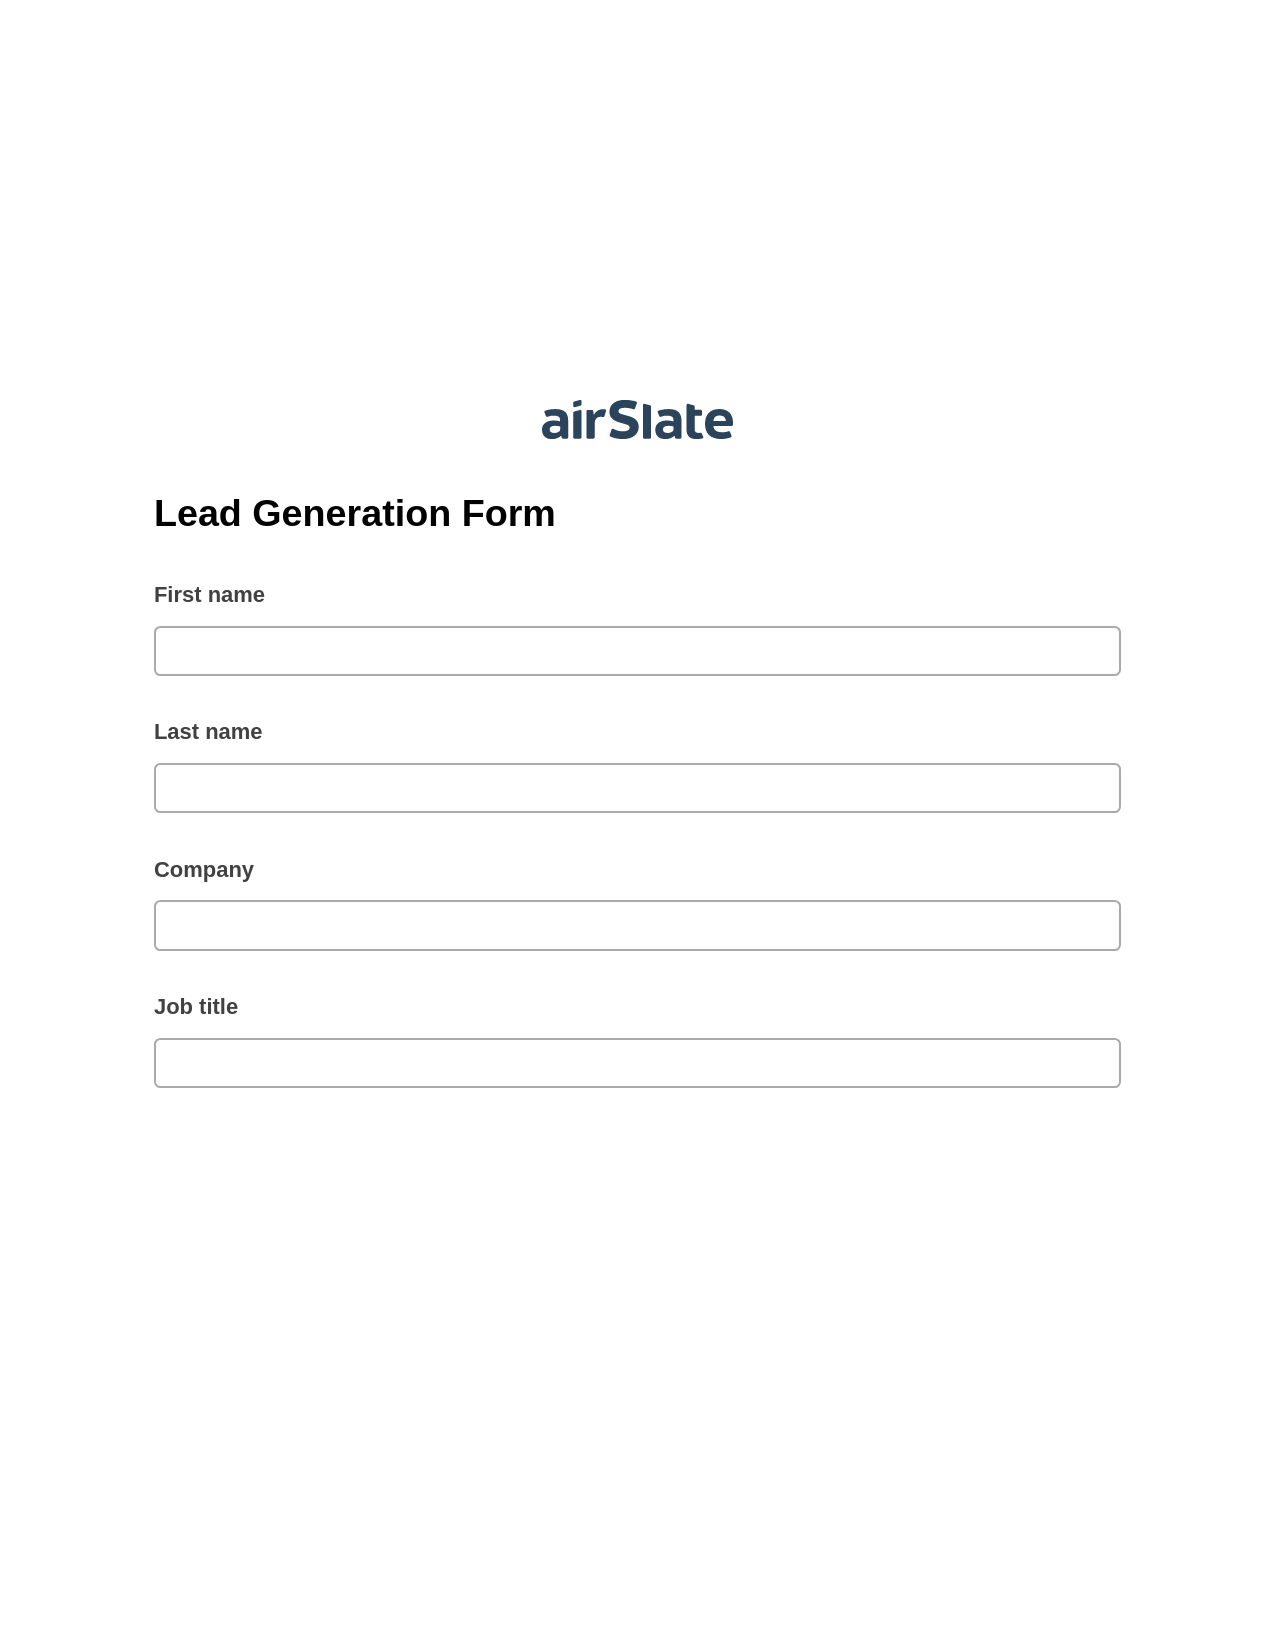 Multirole Lead Generation Form Pre-fill from another Slate Bot, Remove Tags From Slate Bot, Export to Google Sheet Bot